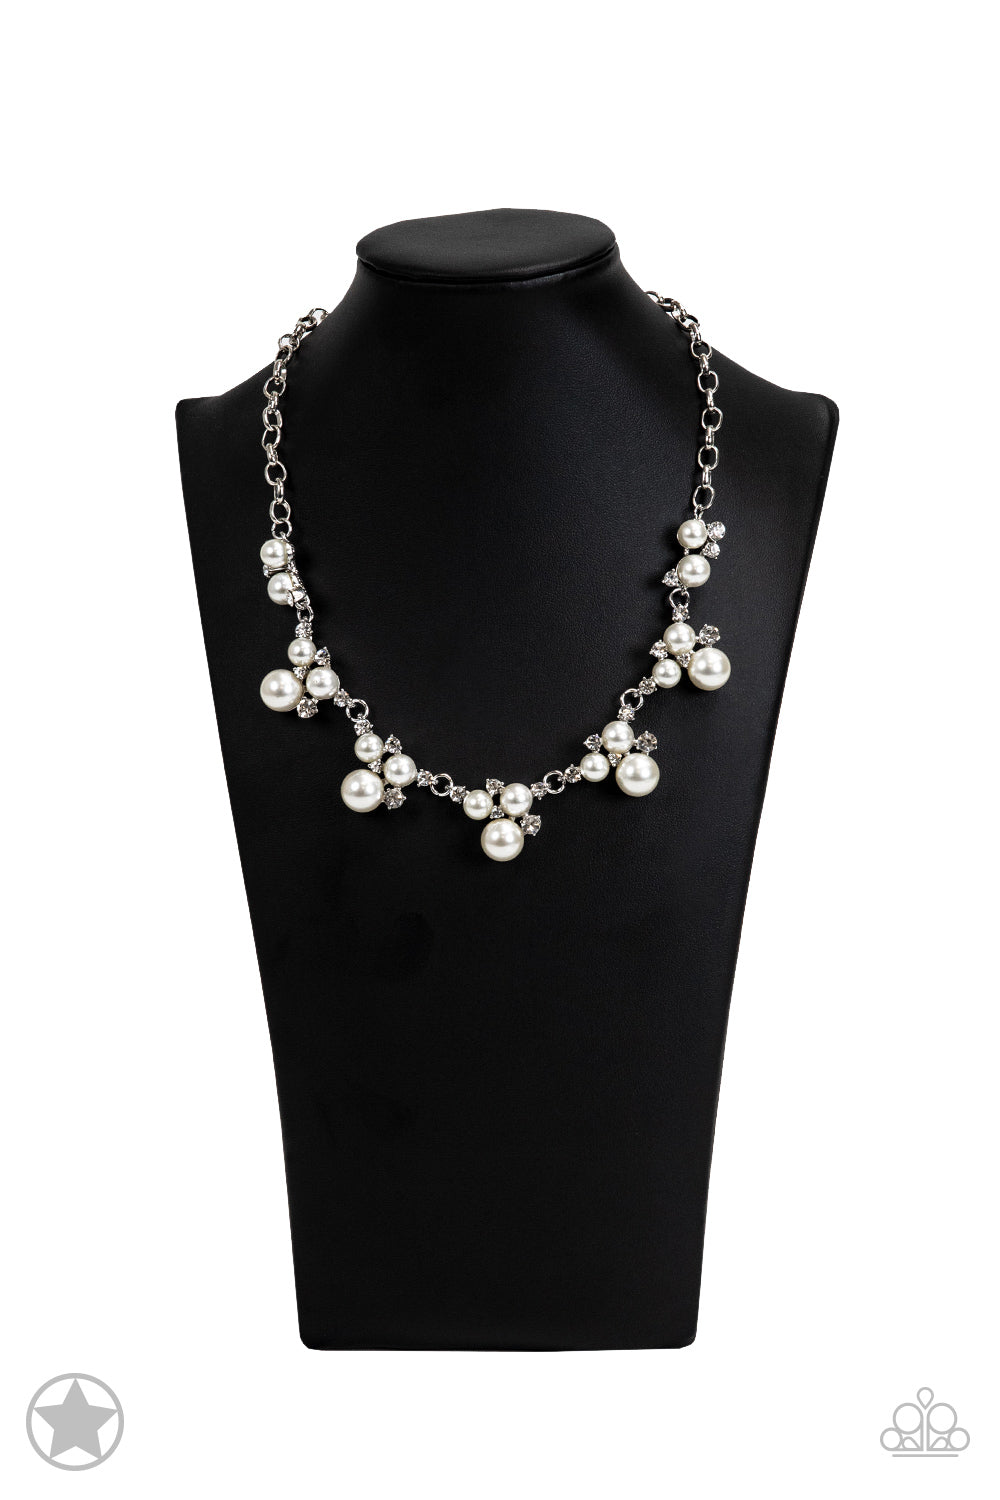 Paparazzi Accessories - A Toast to Perfection - White Necklace